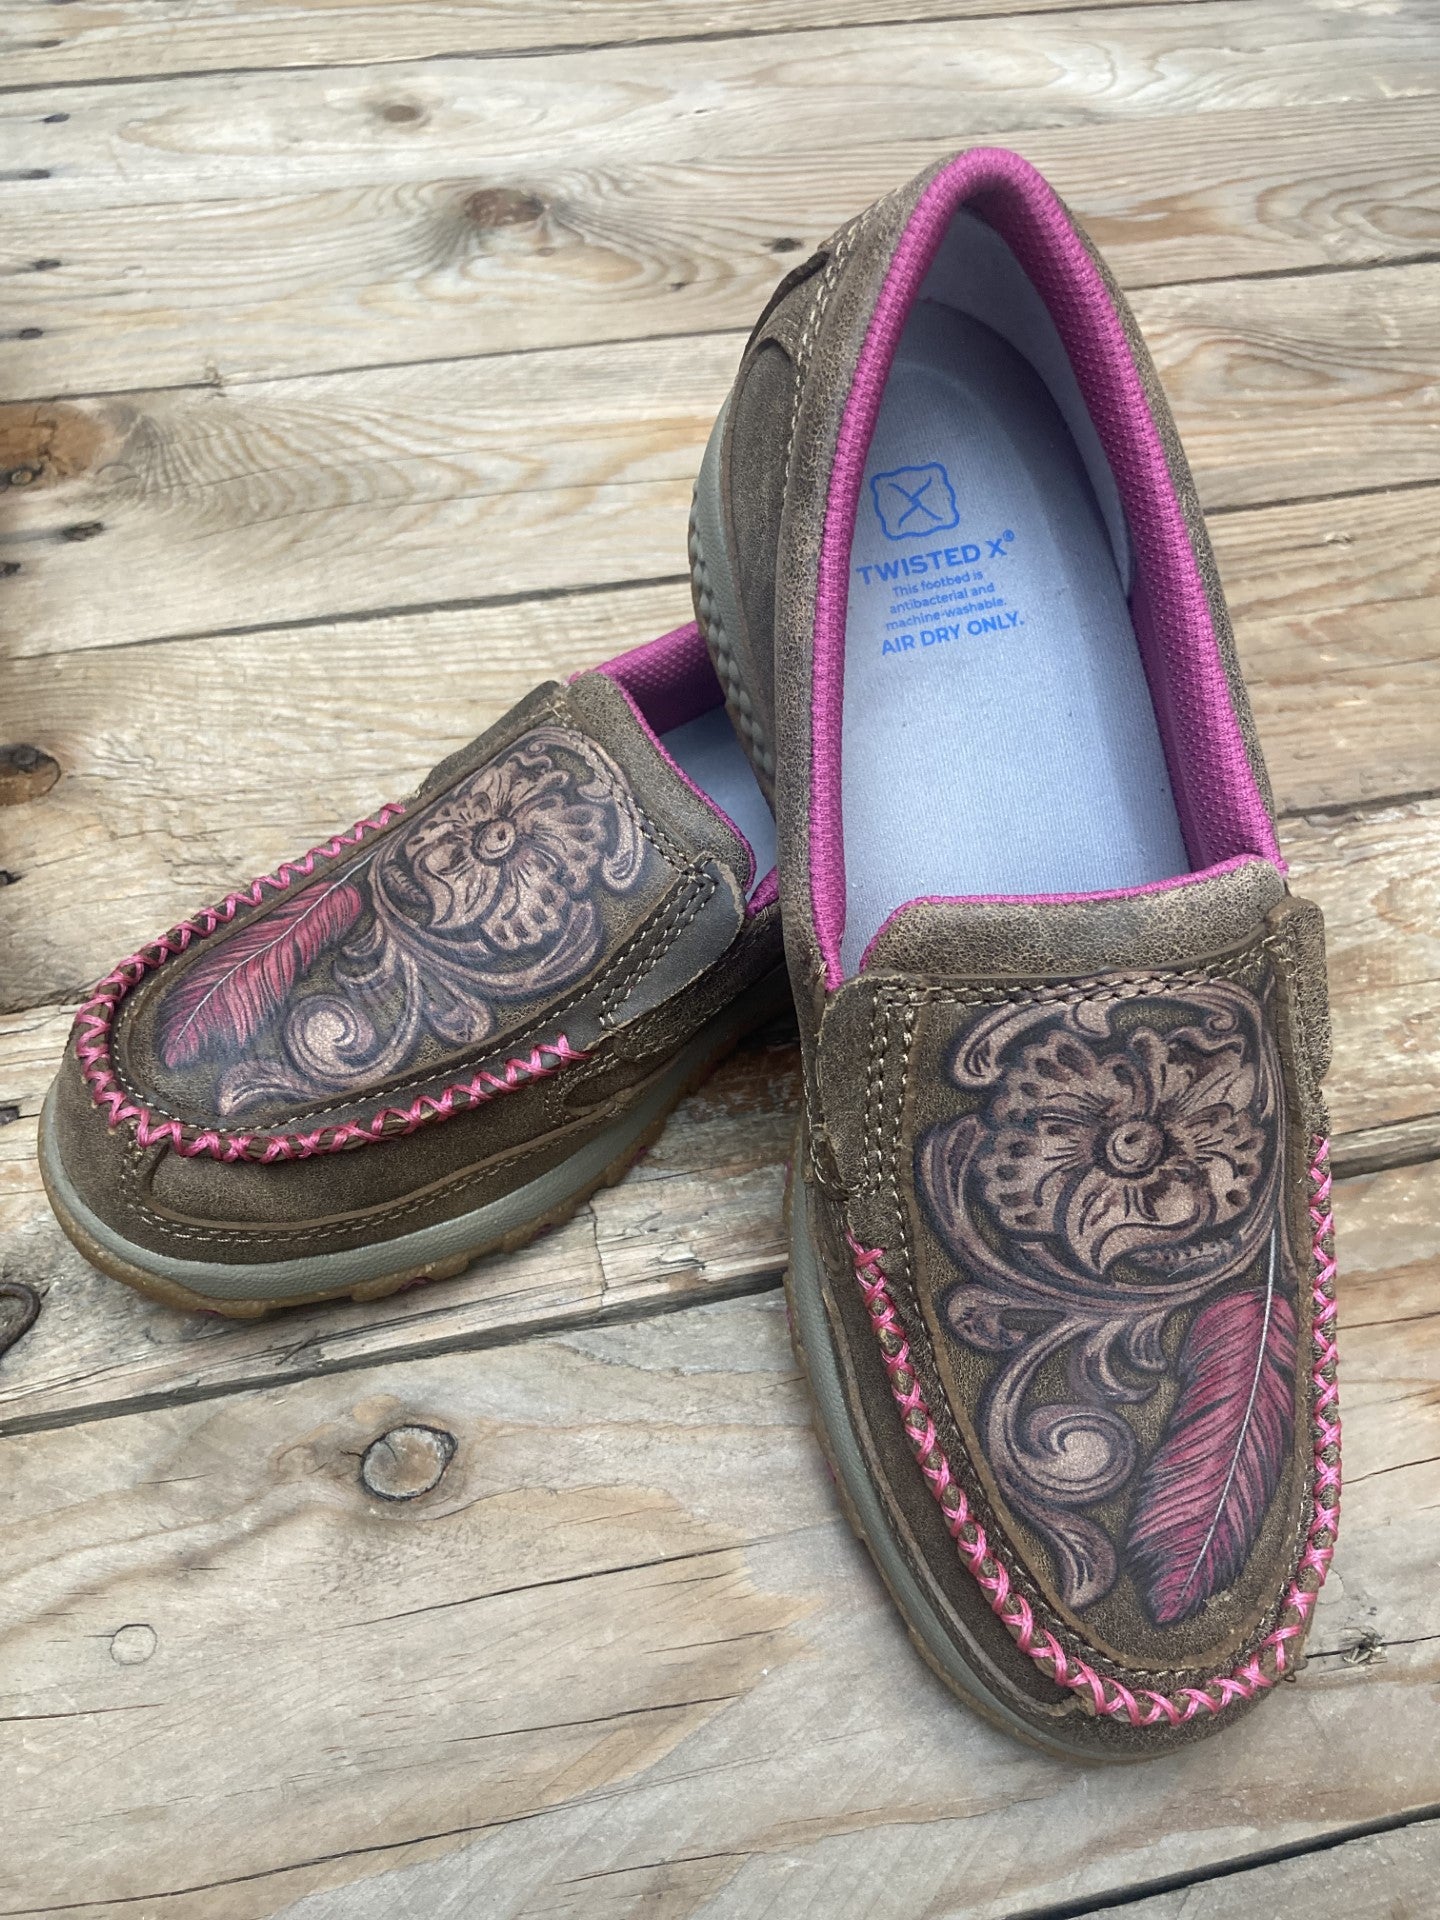 Womens Twisted X Tooled Cellstretch Slip on Shoe - Bomber / Pink (6913183121485)